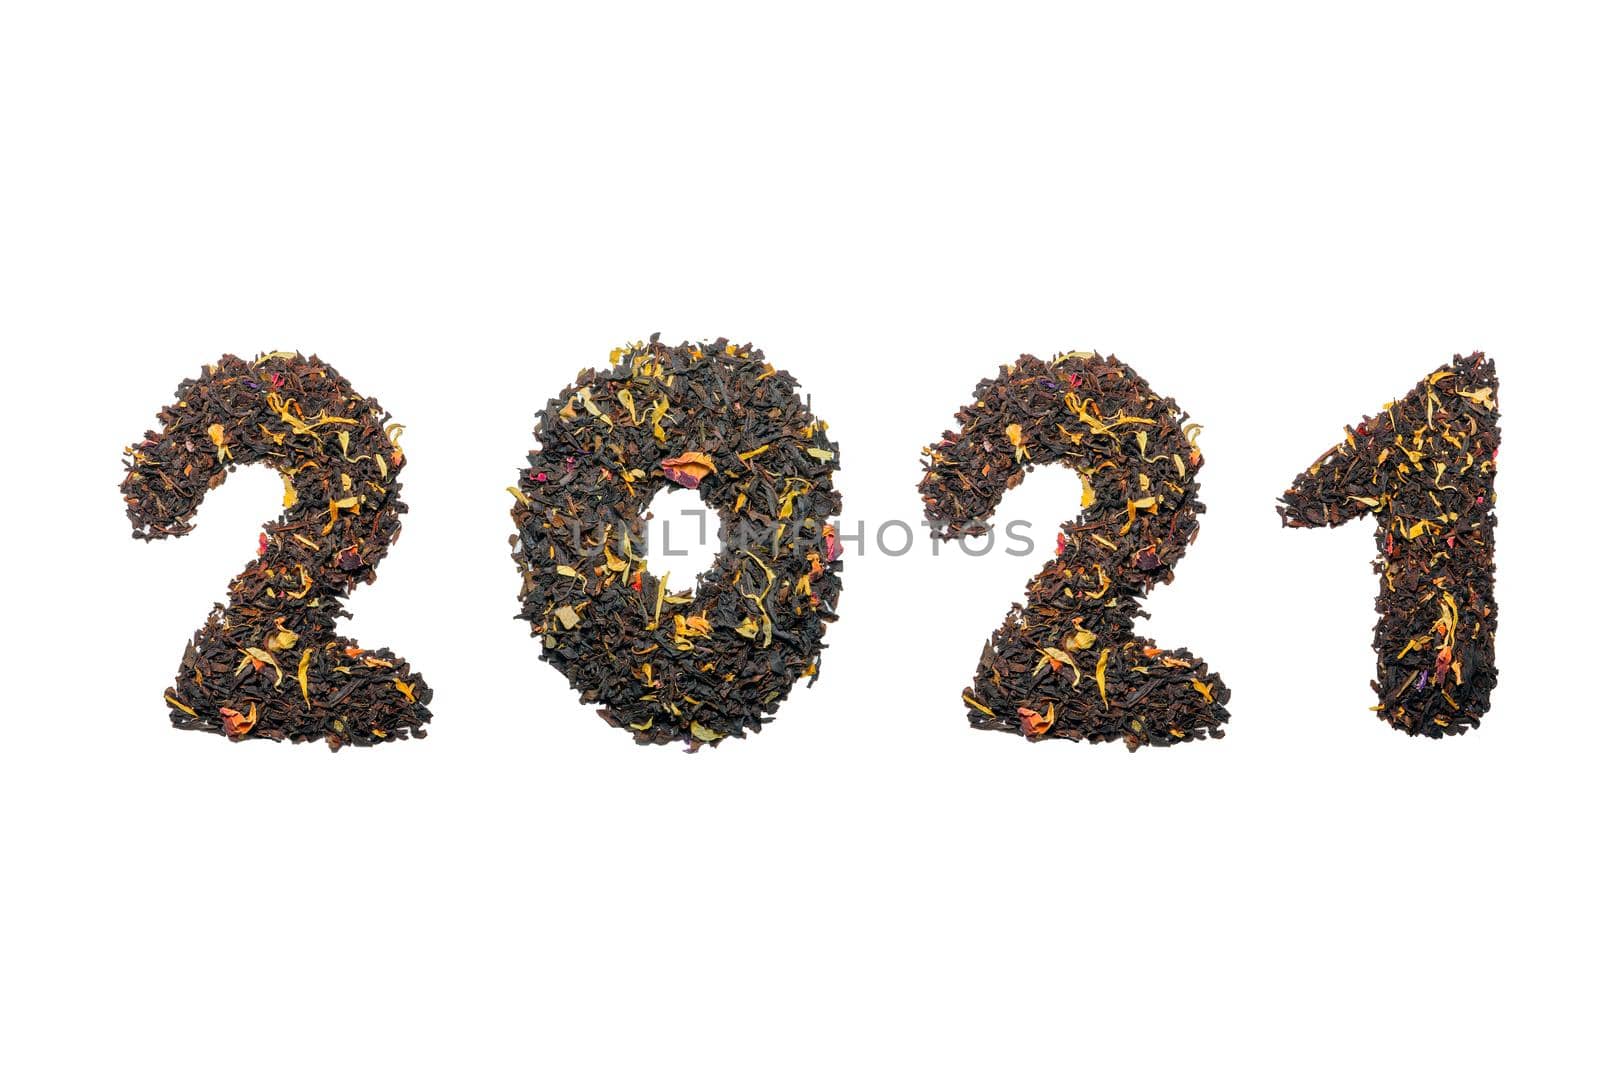 2021 year of tea on a white background top view by roman112007